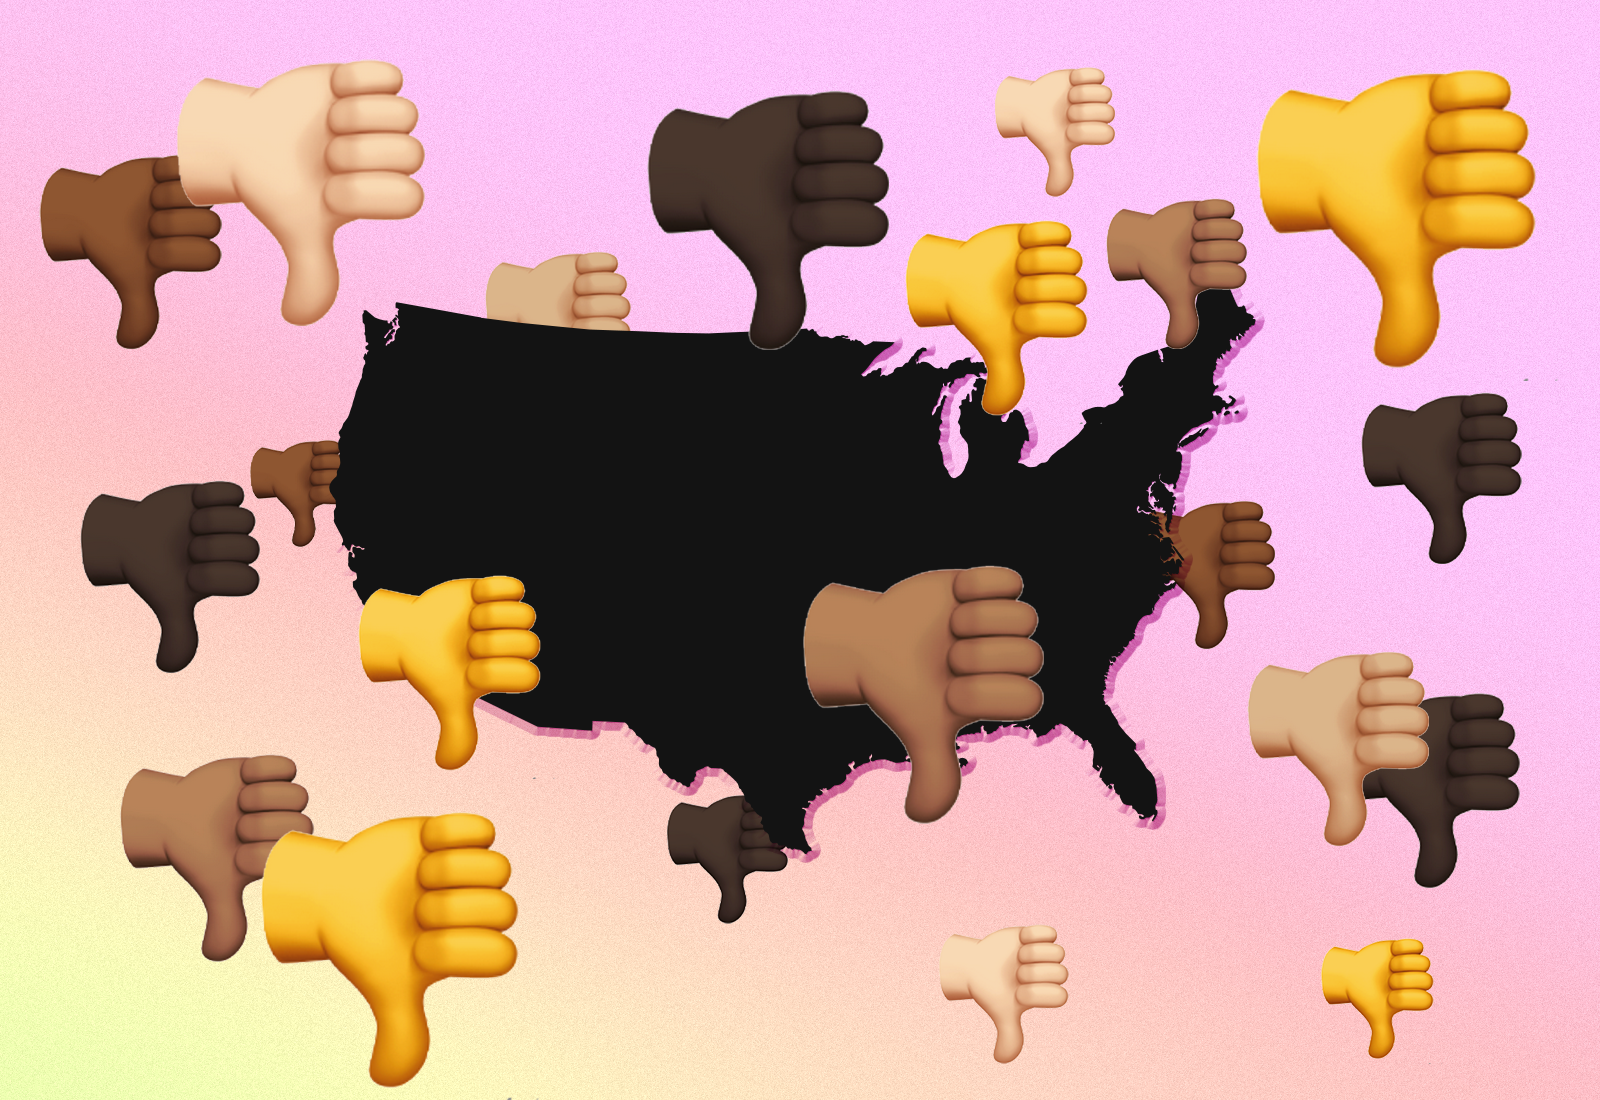 Many thumbs-down emojis against the backdrop of a map of the US